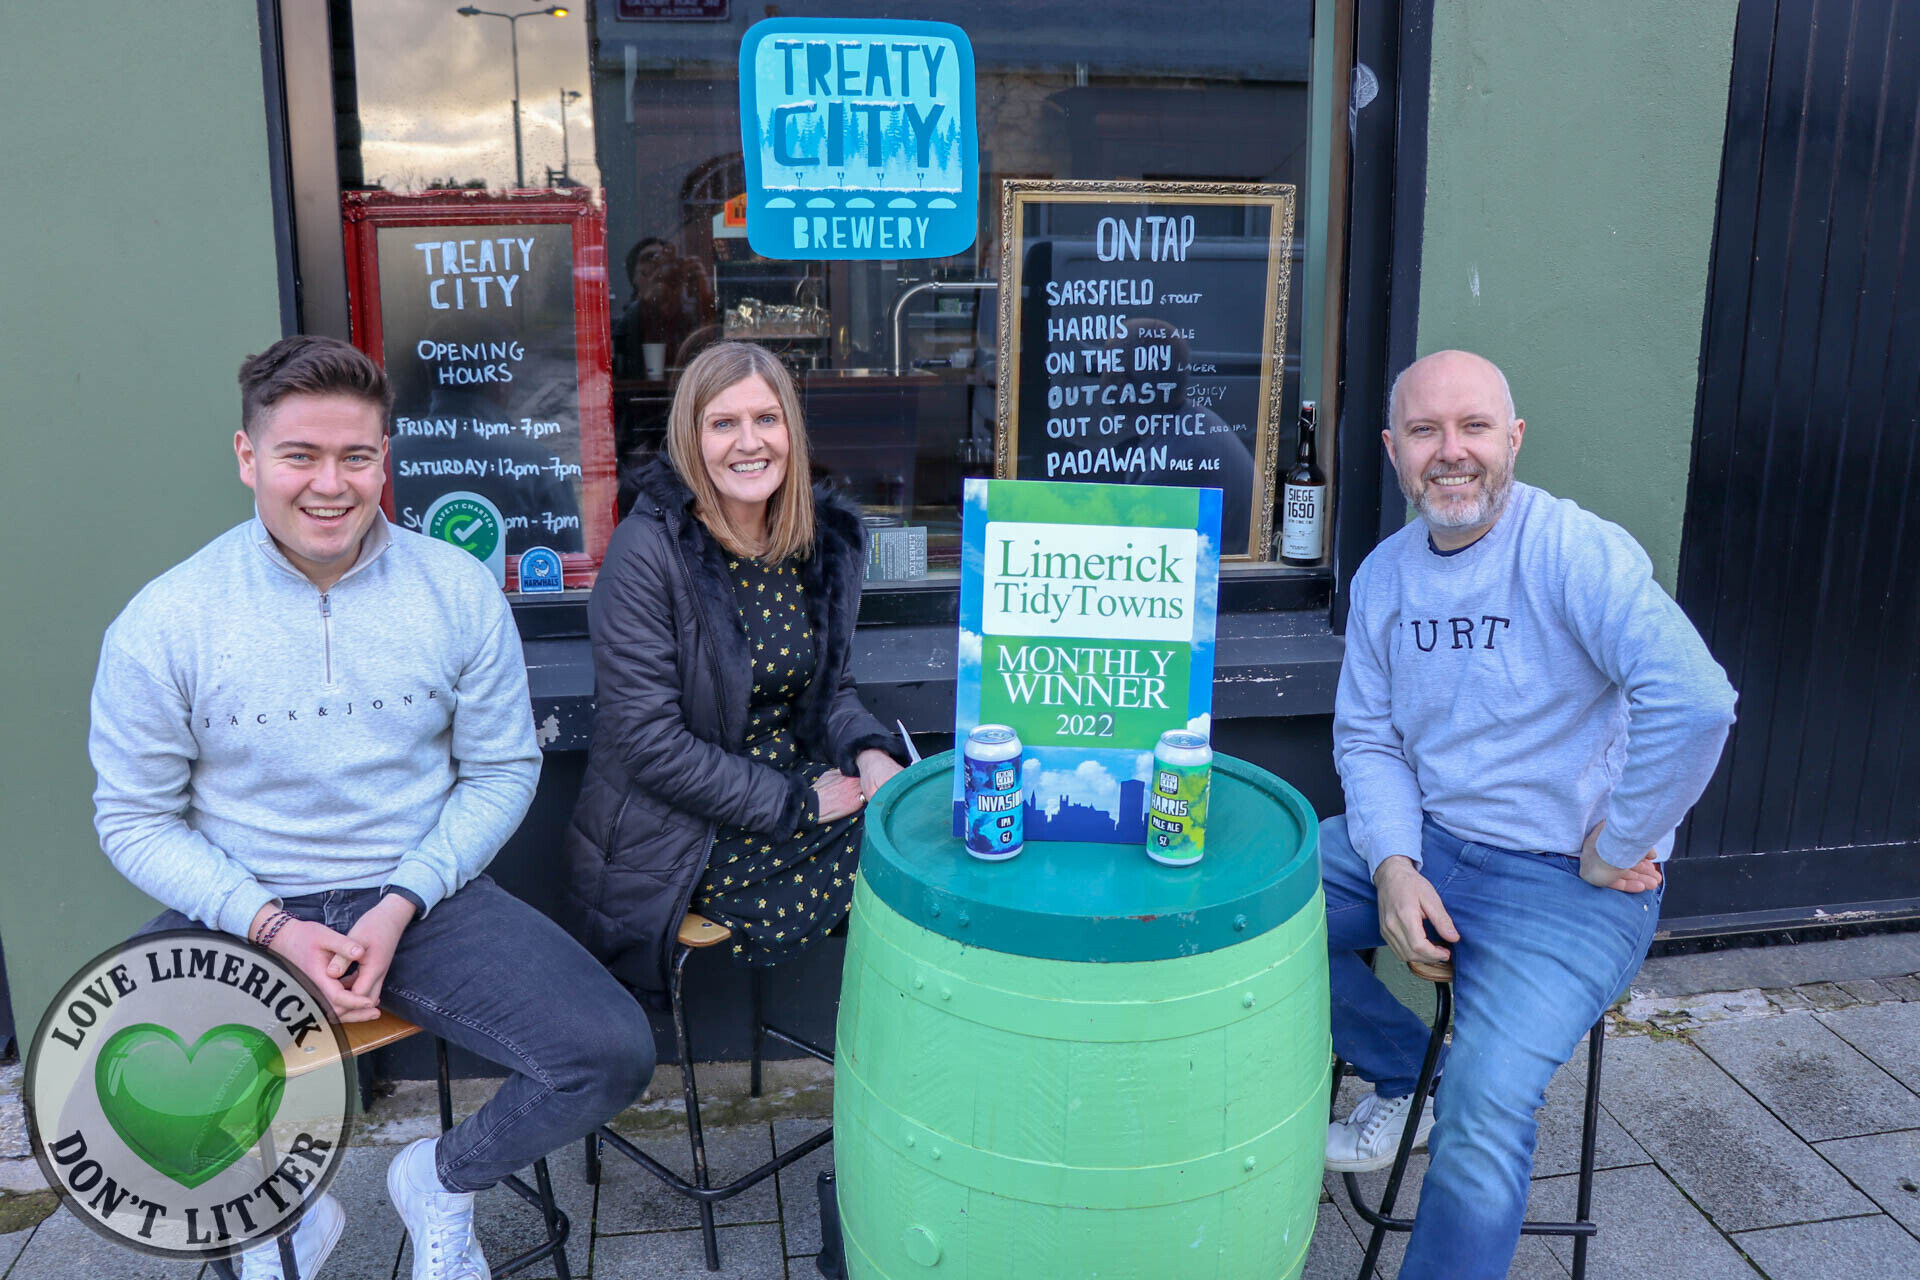 Limerick Tidy Towns February 2022